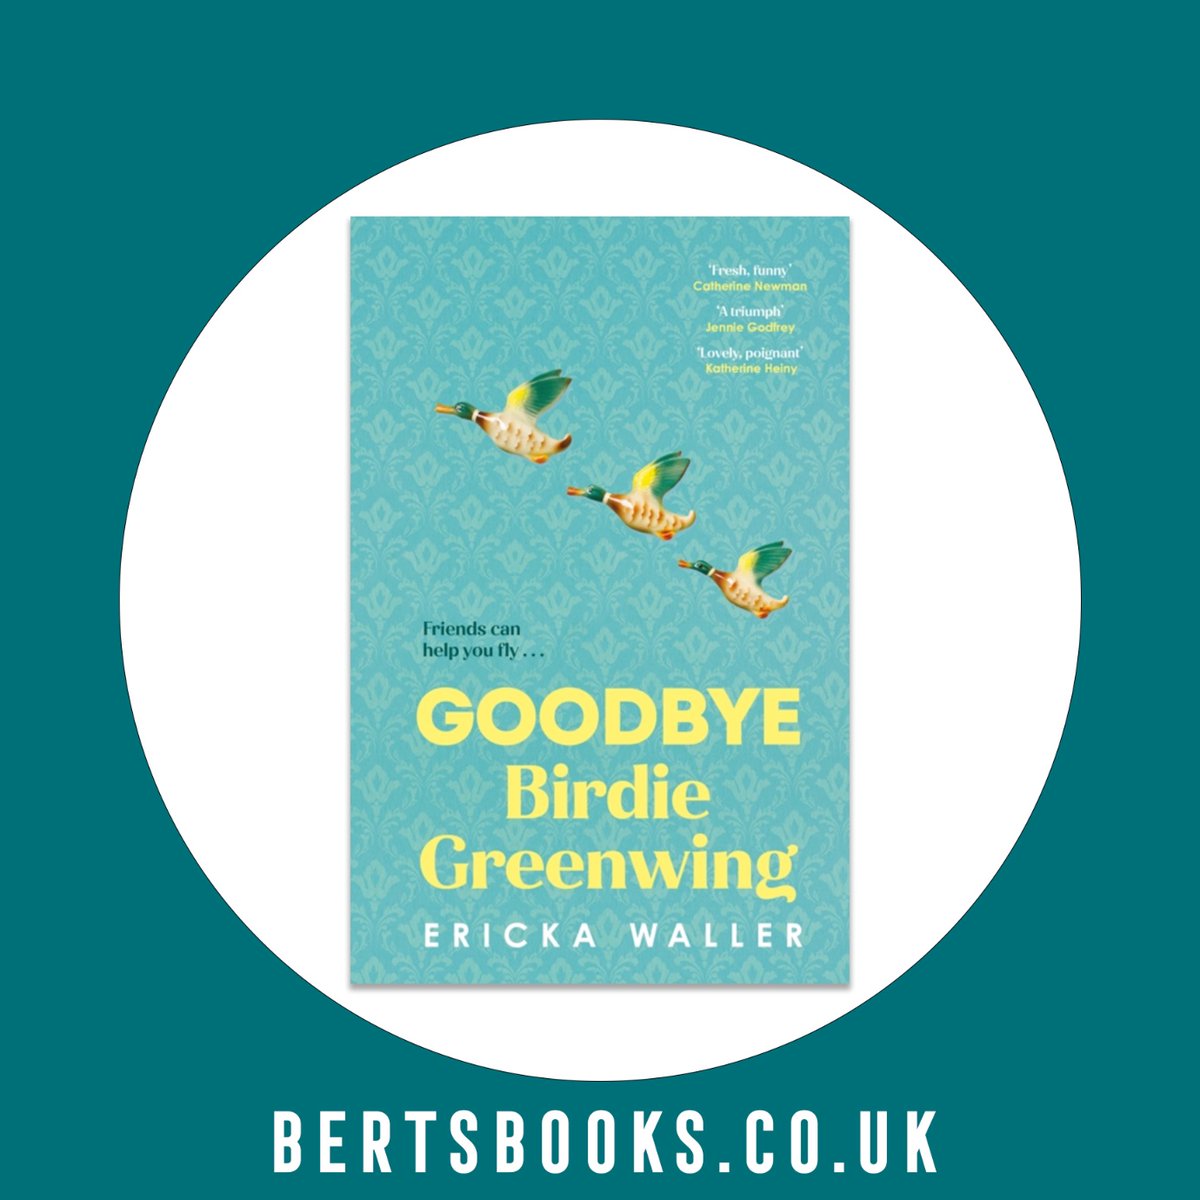 2) Goodbye Birdie Greenwing by @ErickaWaller1 Our biggest selling hardback this month was this one from Ericka who popped in to sign and dedicate pre-ordered copies. Sold a few in the shop, too!